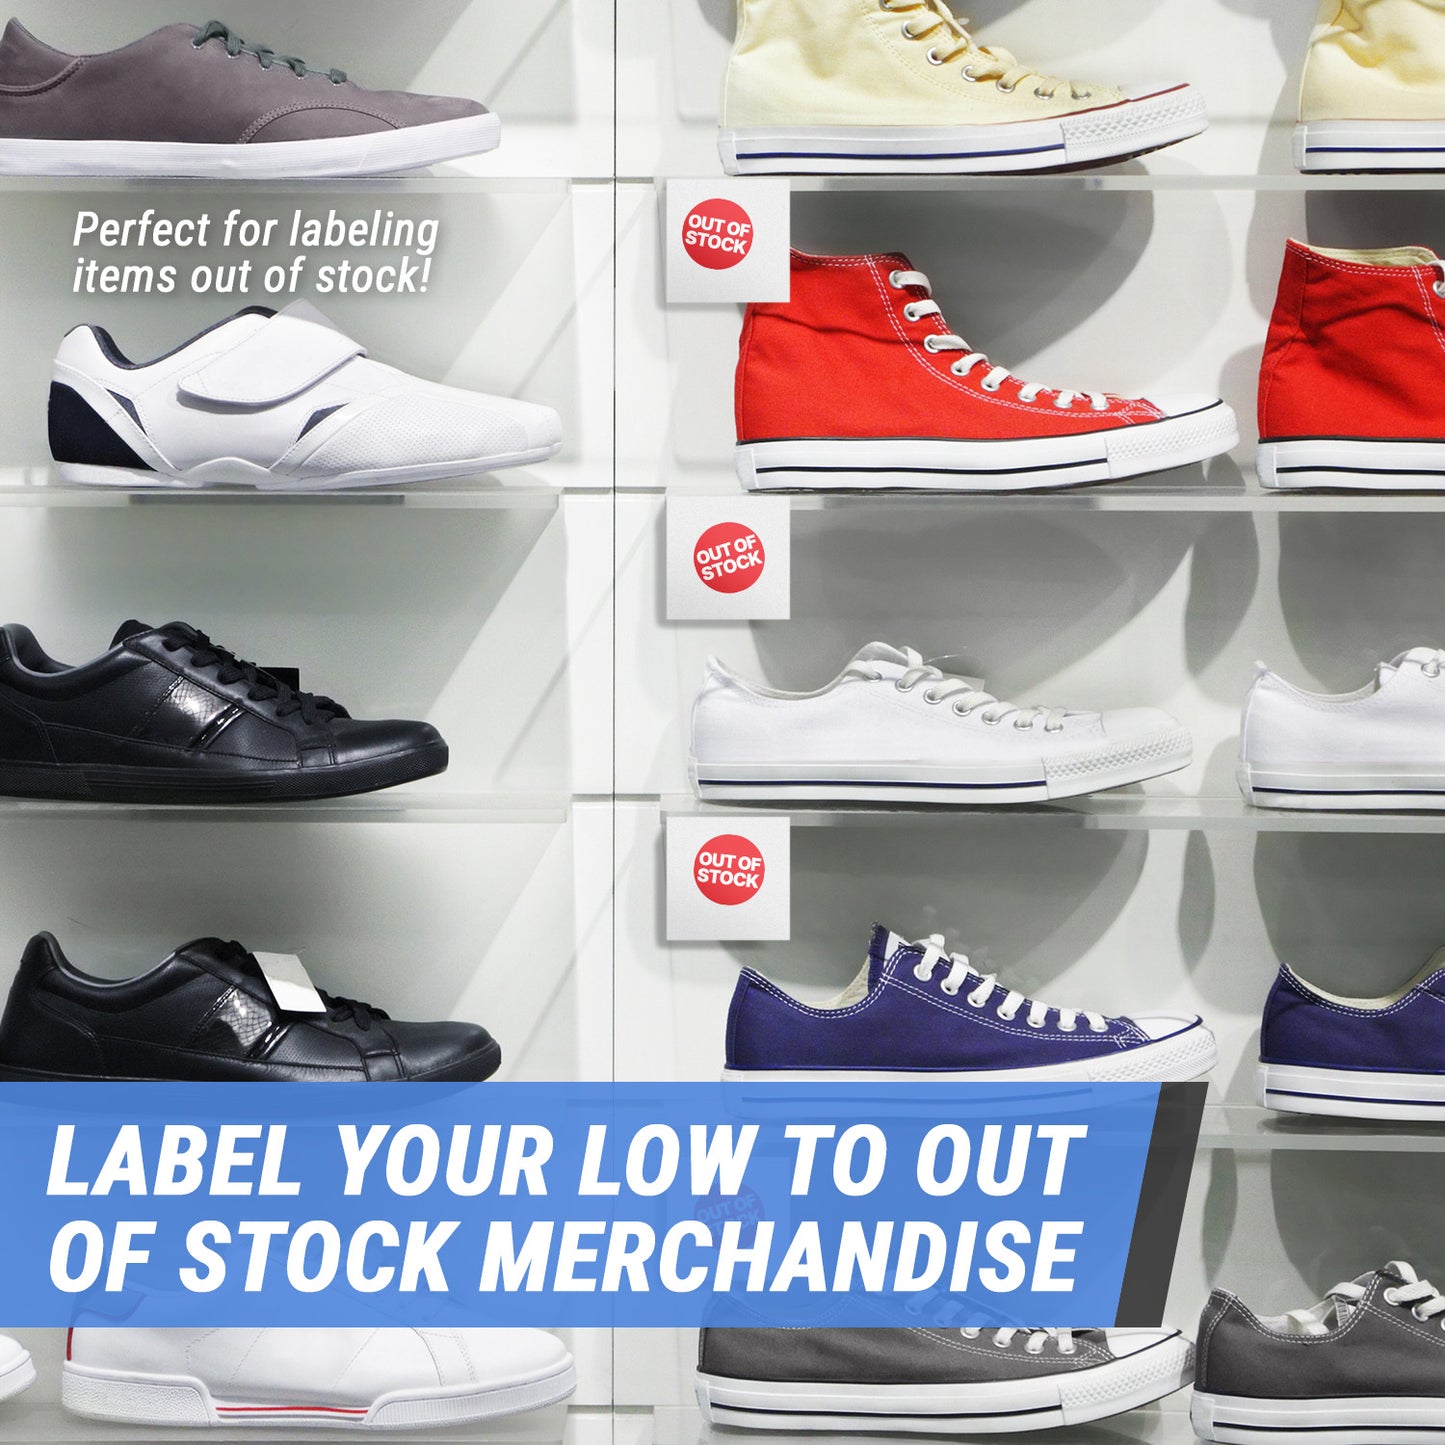 1.5 inch | Retail & Sales: Out of Stock Labels